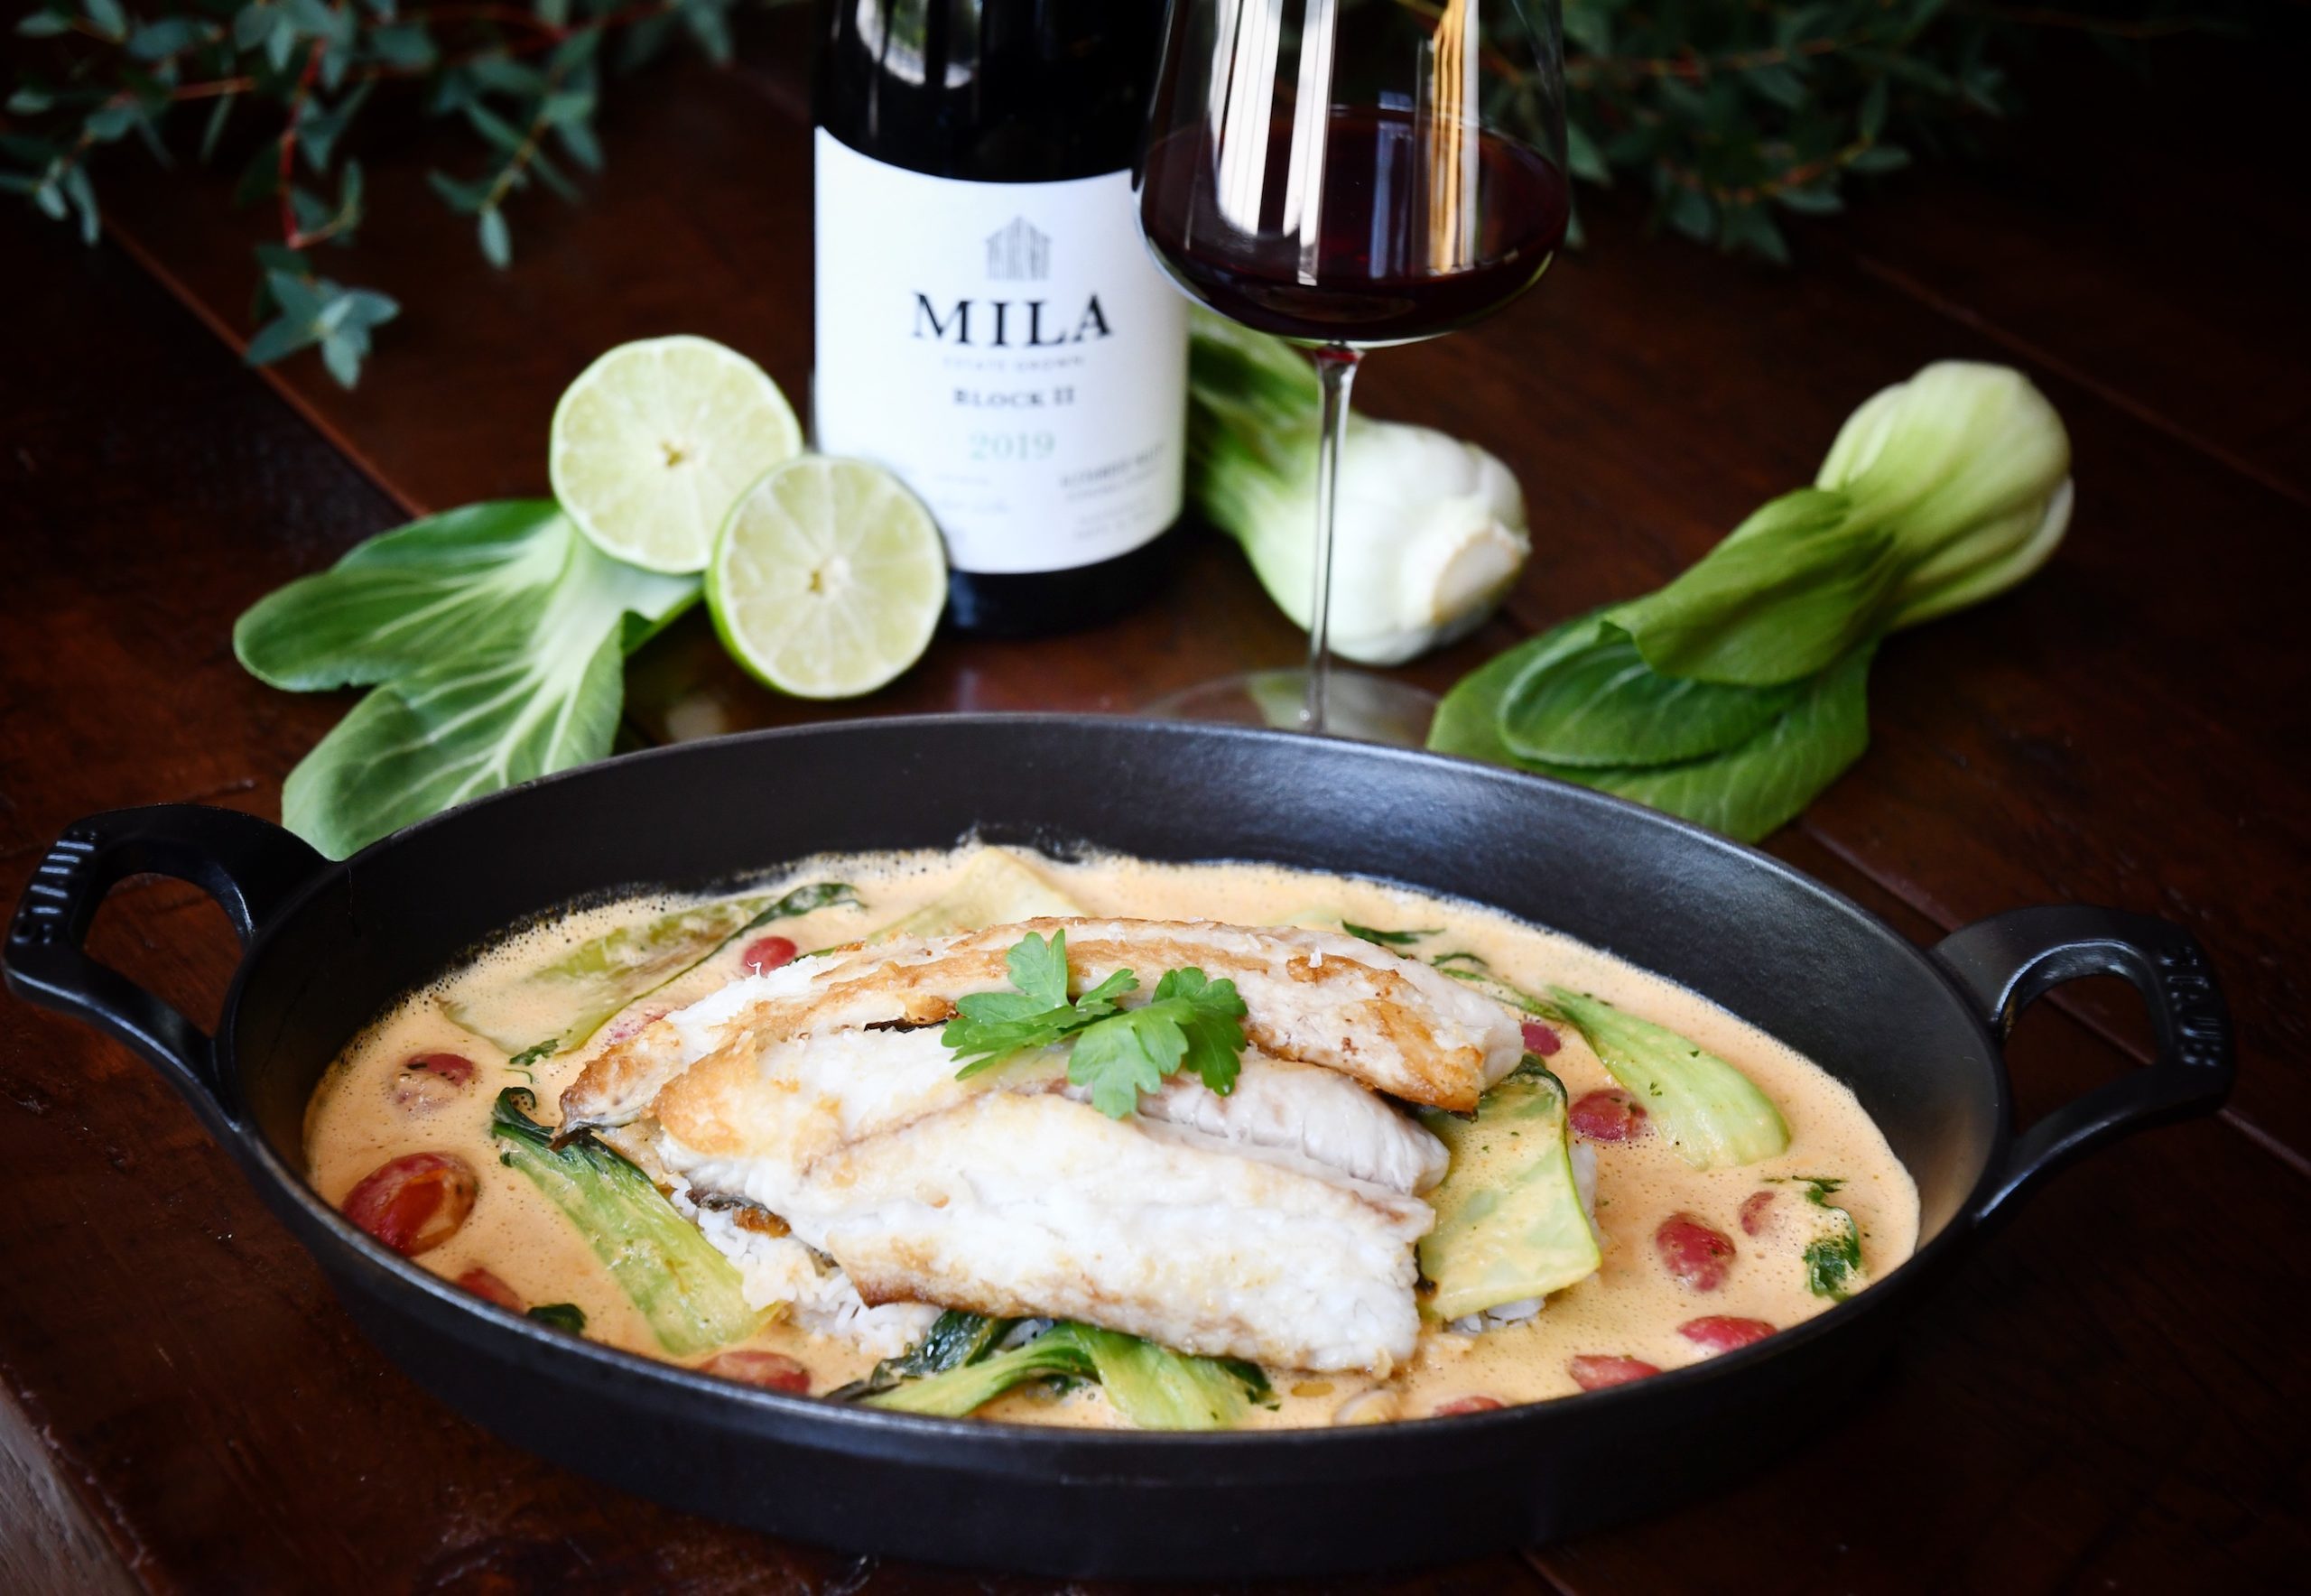 Pan Seared Red Snapper Over Sauteed Bok Choy, shown with Mila Block II Grenache